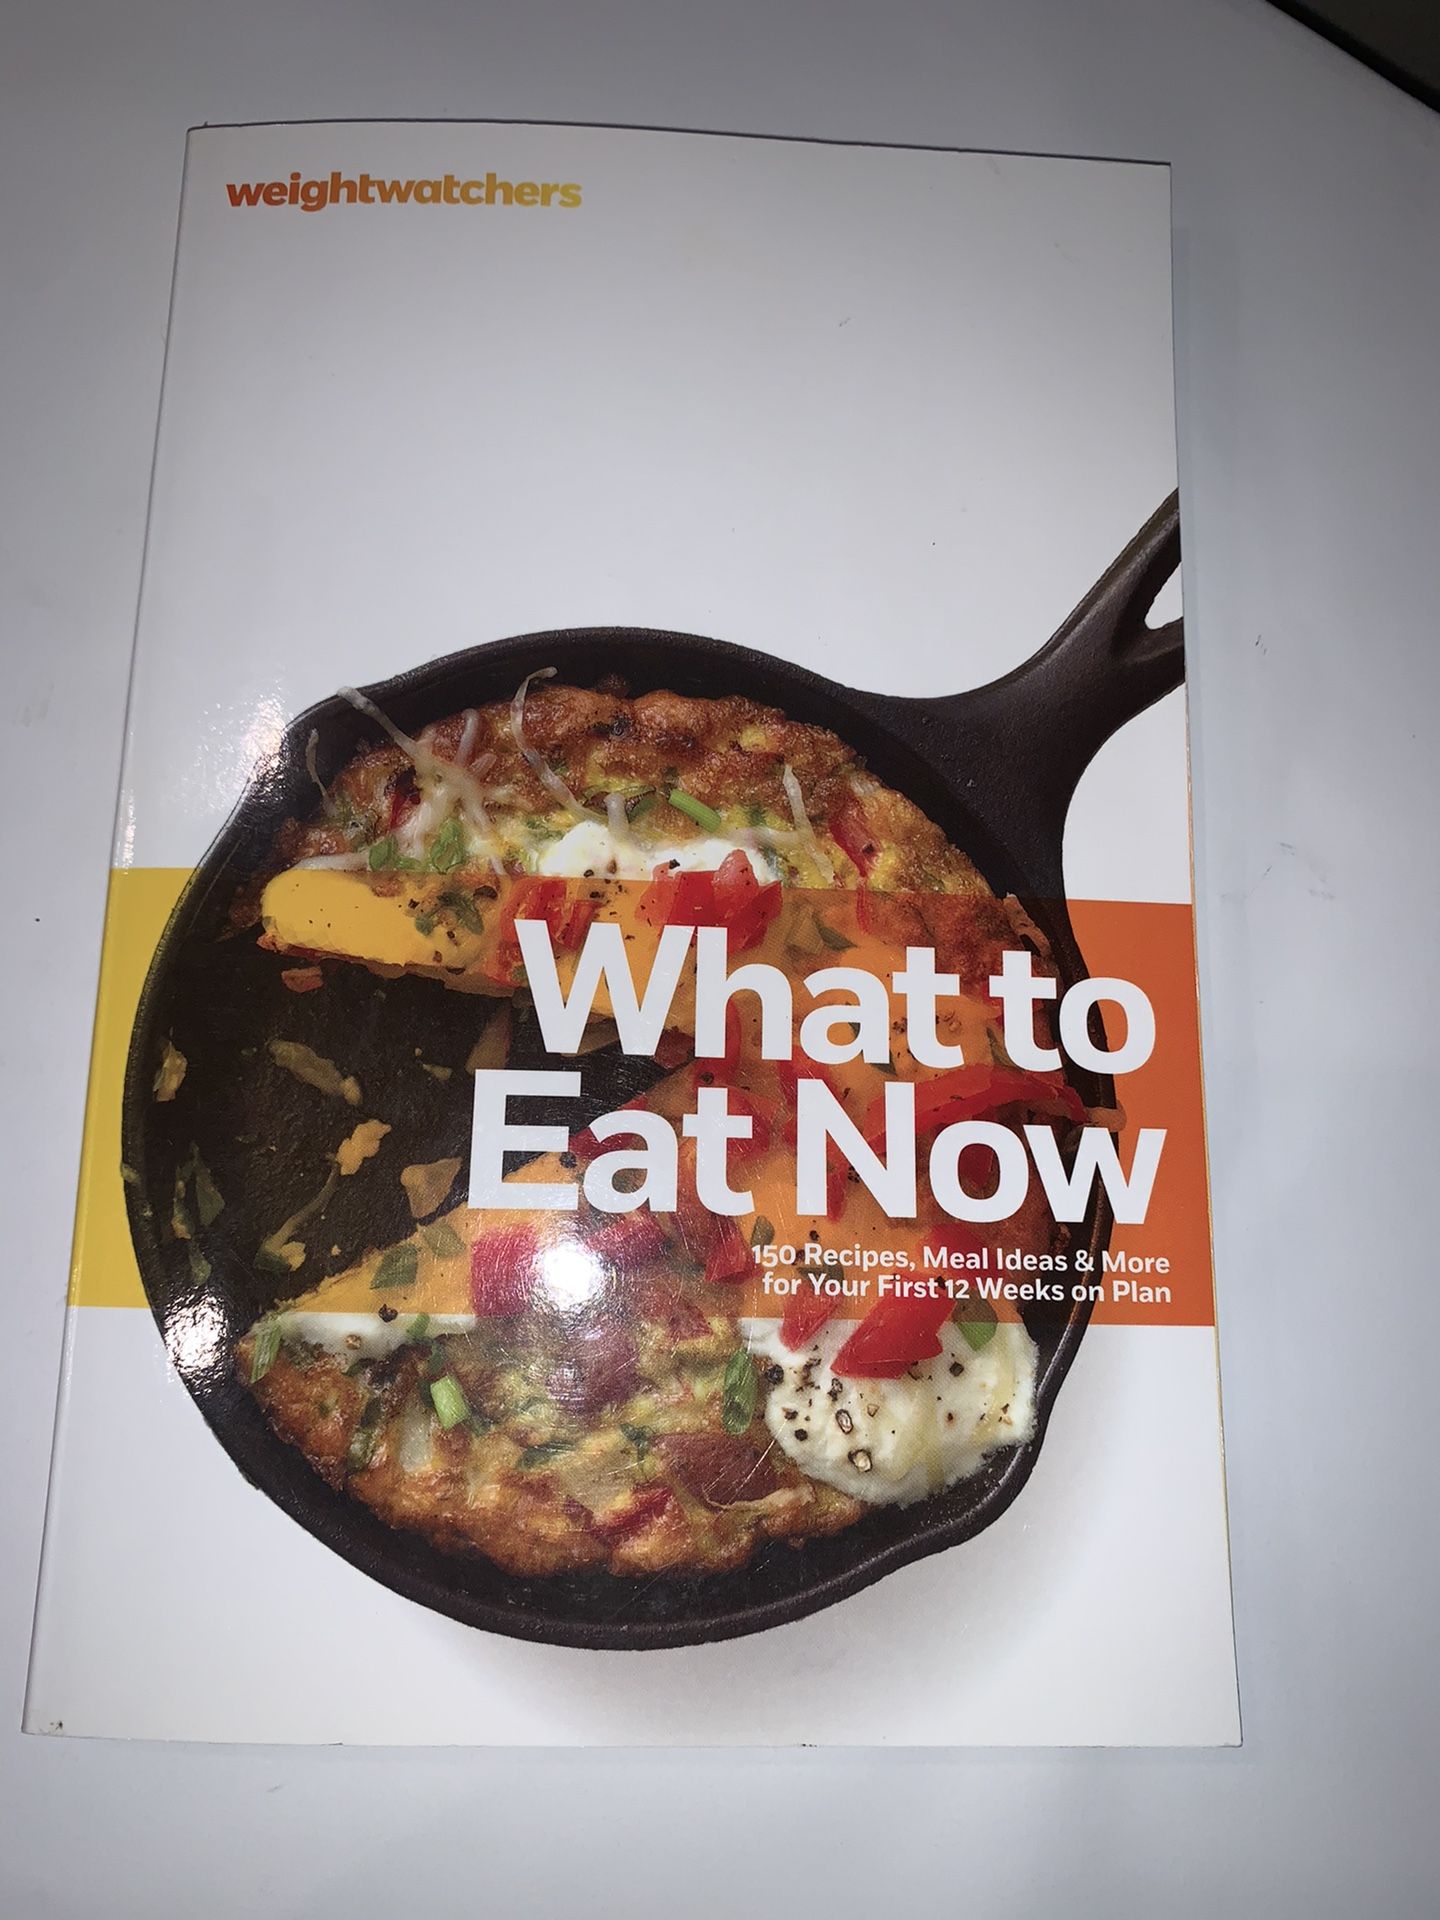 Weightwatchers Book “ What To Eat Now”